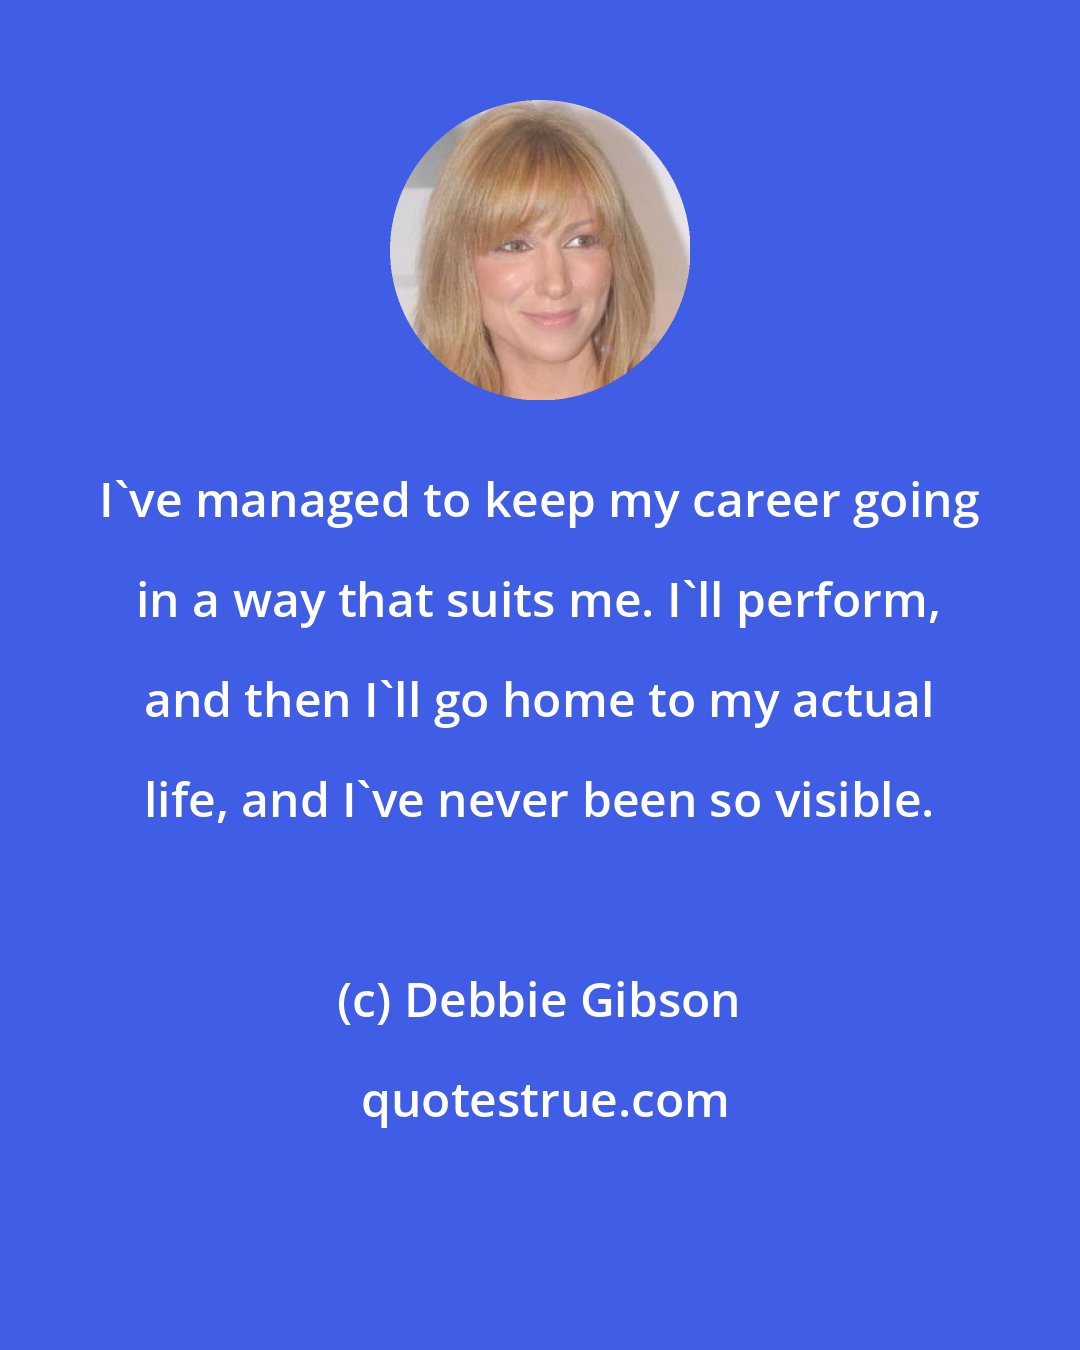 Debbie Gibson: I've managed to keep my career going in a way that suits me. I'll perform, and then I'll go home to my actual life, and I've never been so visible.